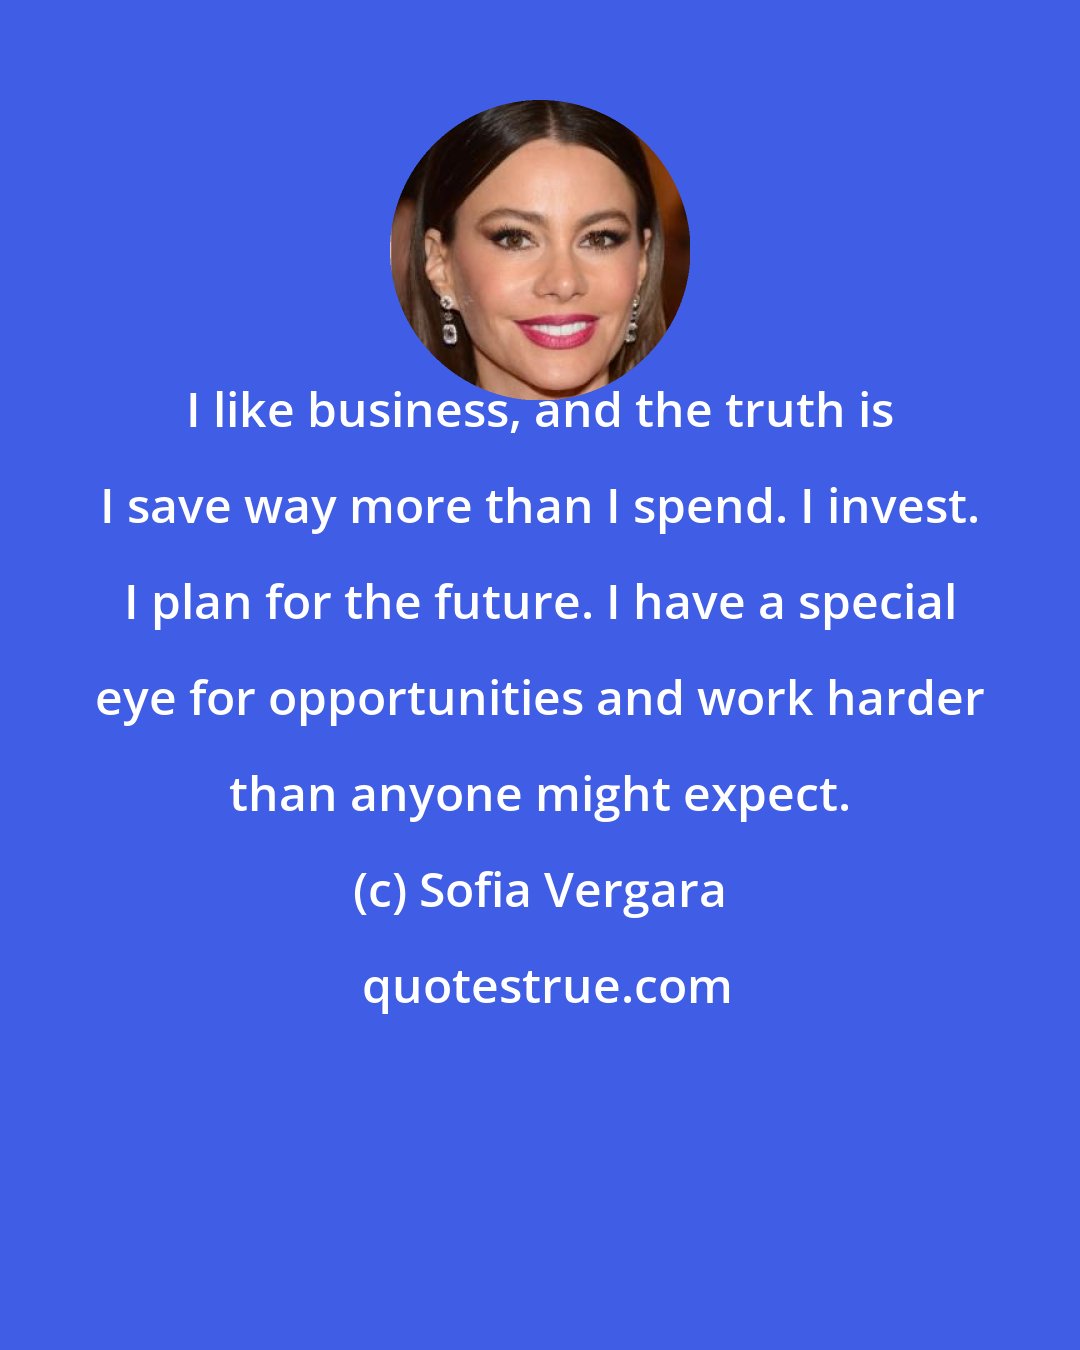 Sofia Vergara: I like business, and the truth is I save way more than I spend. I invest. I plan for the future. I have a special eye for opportunities and work harder than anyone might expect.